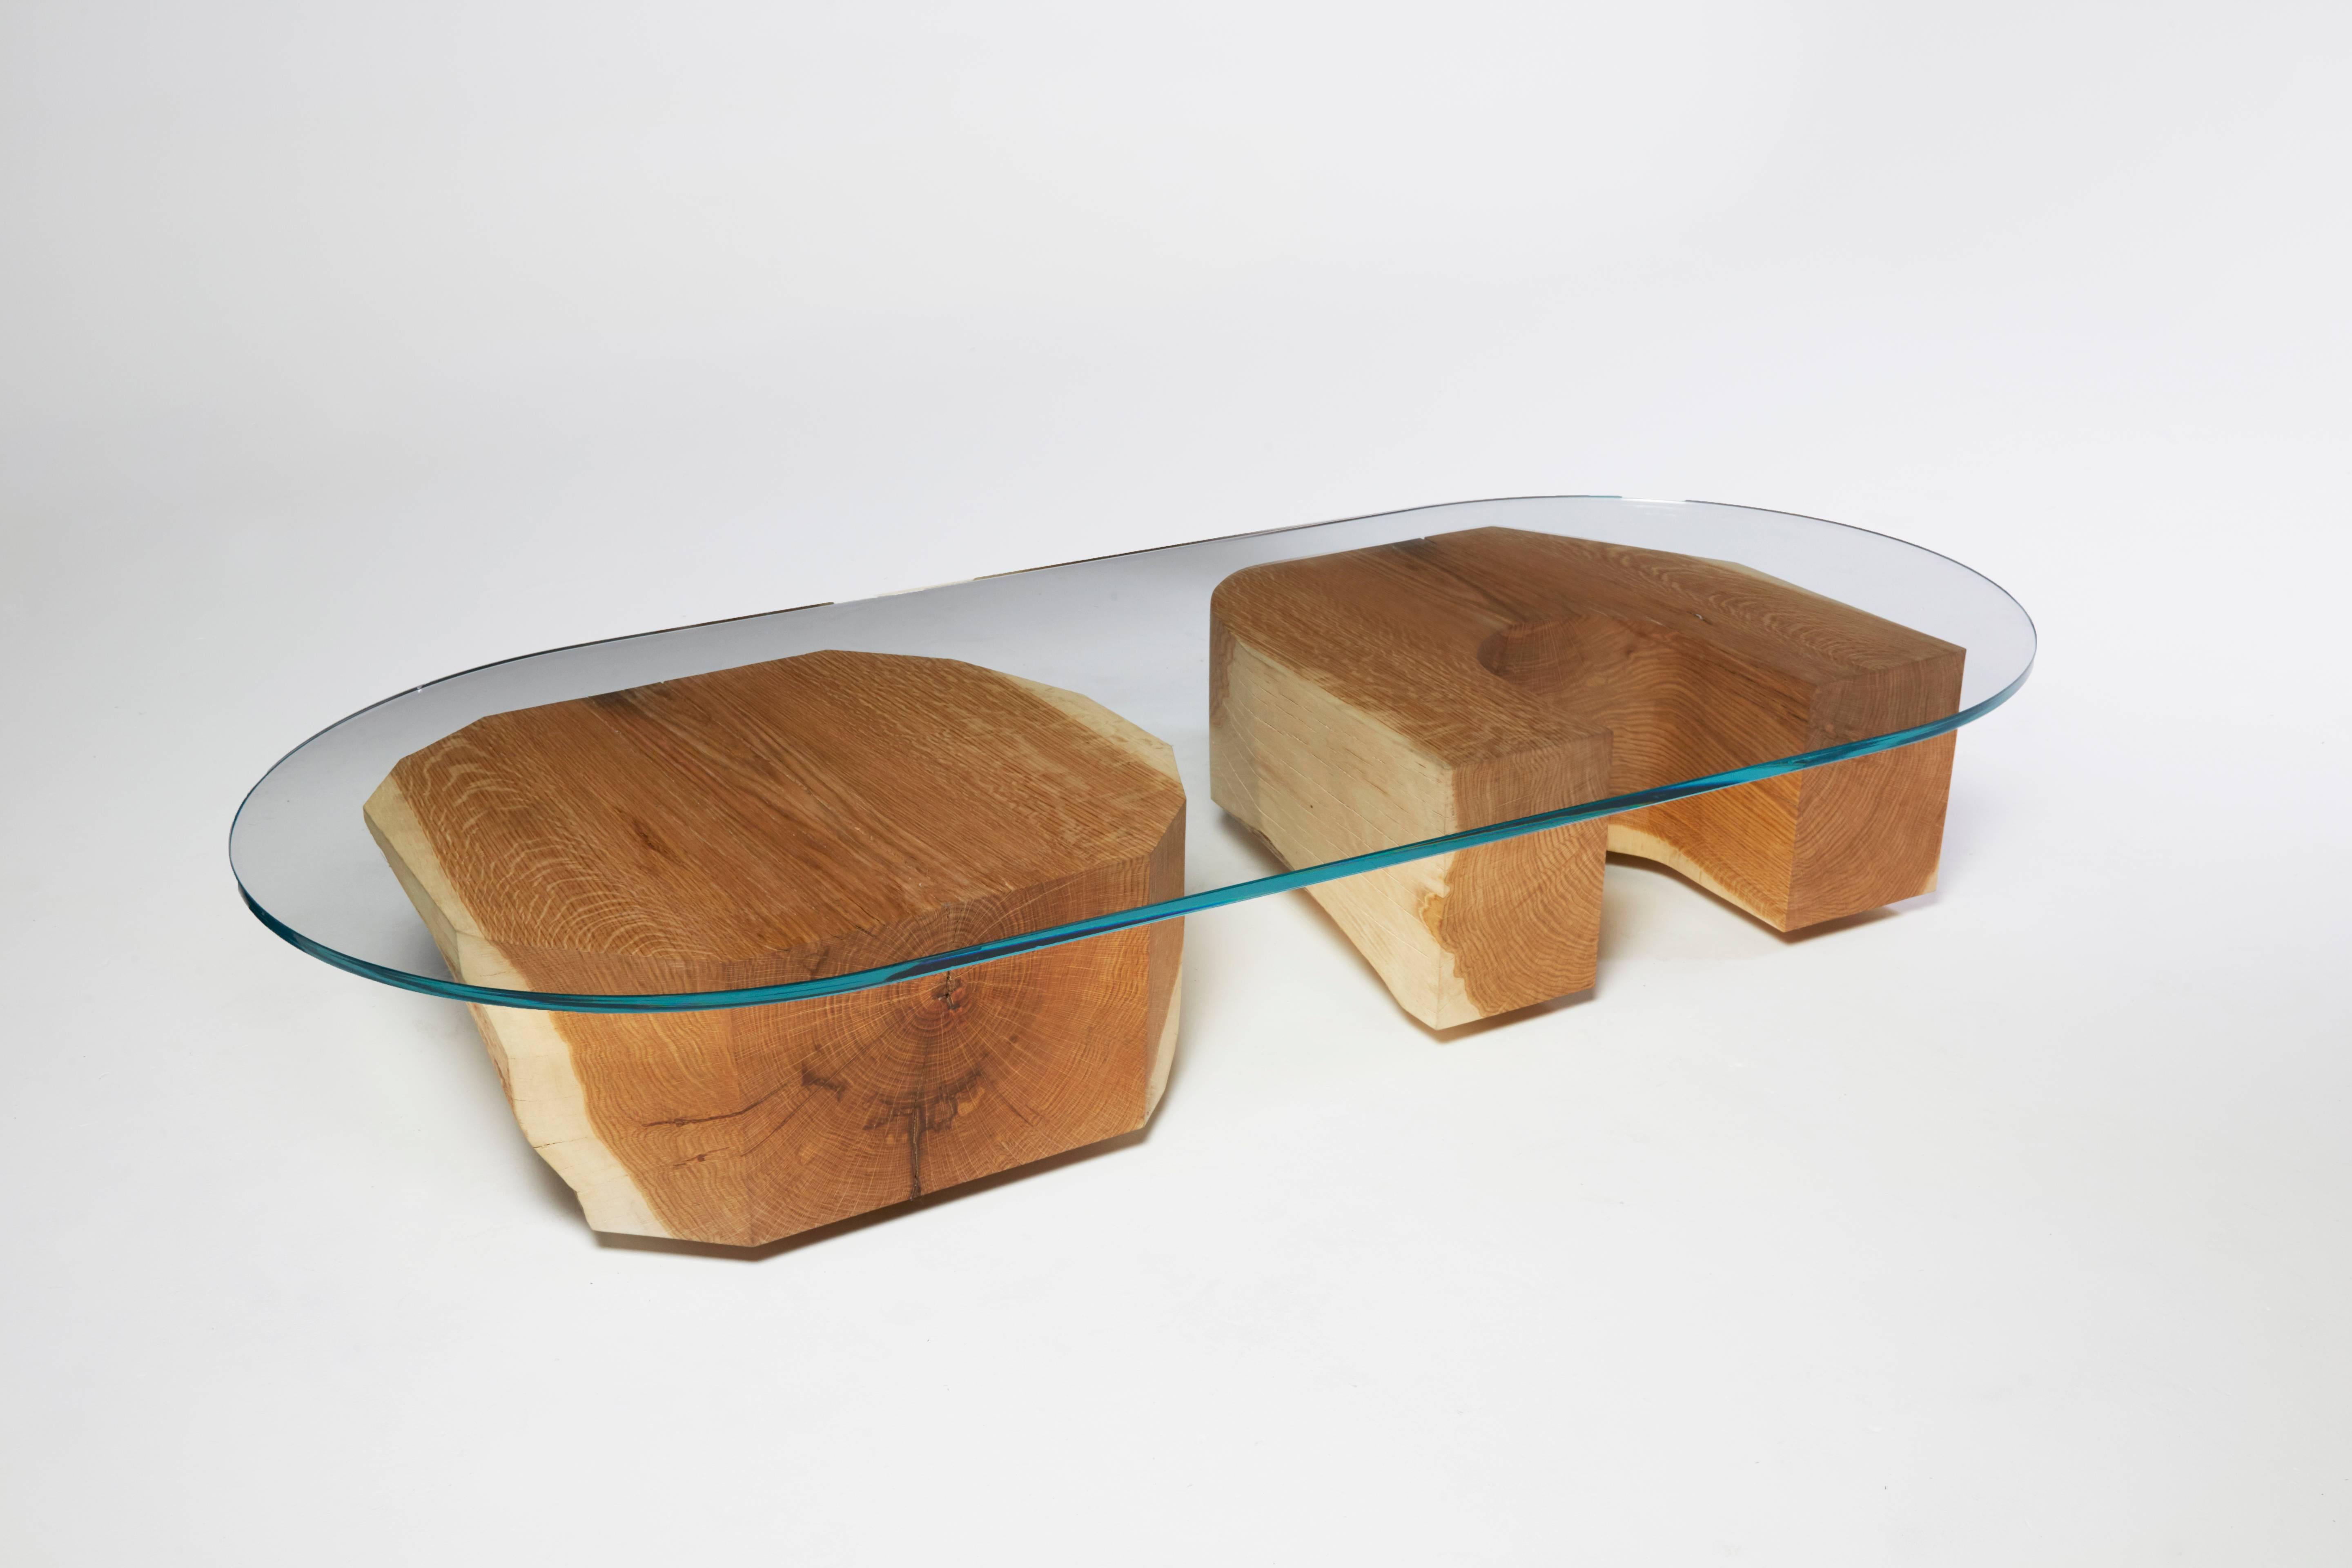 The Tumble Table is a usable sculpture by Noah Spencer made out of two, large, carved pieces of whole white oak and an oval piece of glass. The chunky shapes that hold up the glass tabletop can be placed horizontally on their sides, or vertically